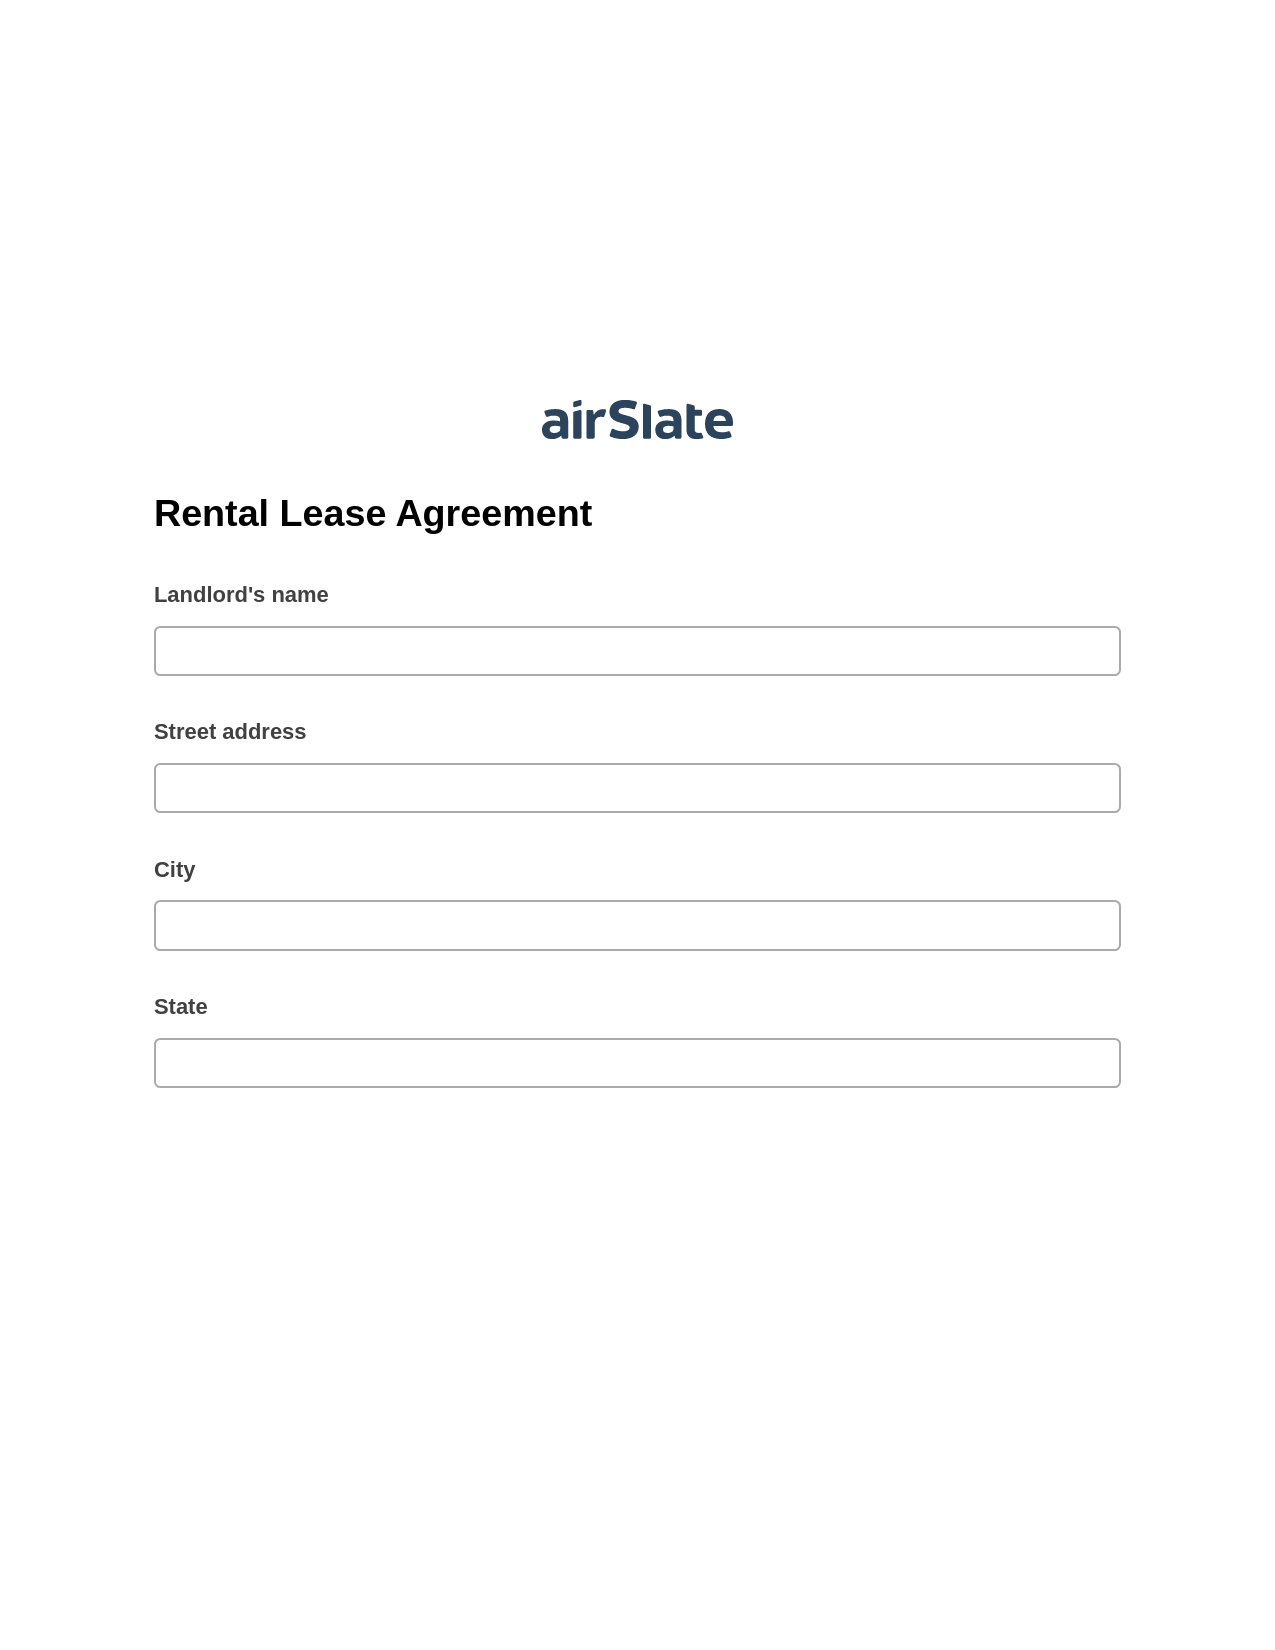 Rental Lease Agreement Pre-fill from another Slate Bot, Invoke Salesforce Process Bot, Export to Salesforce Bot